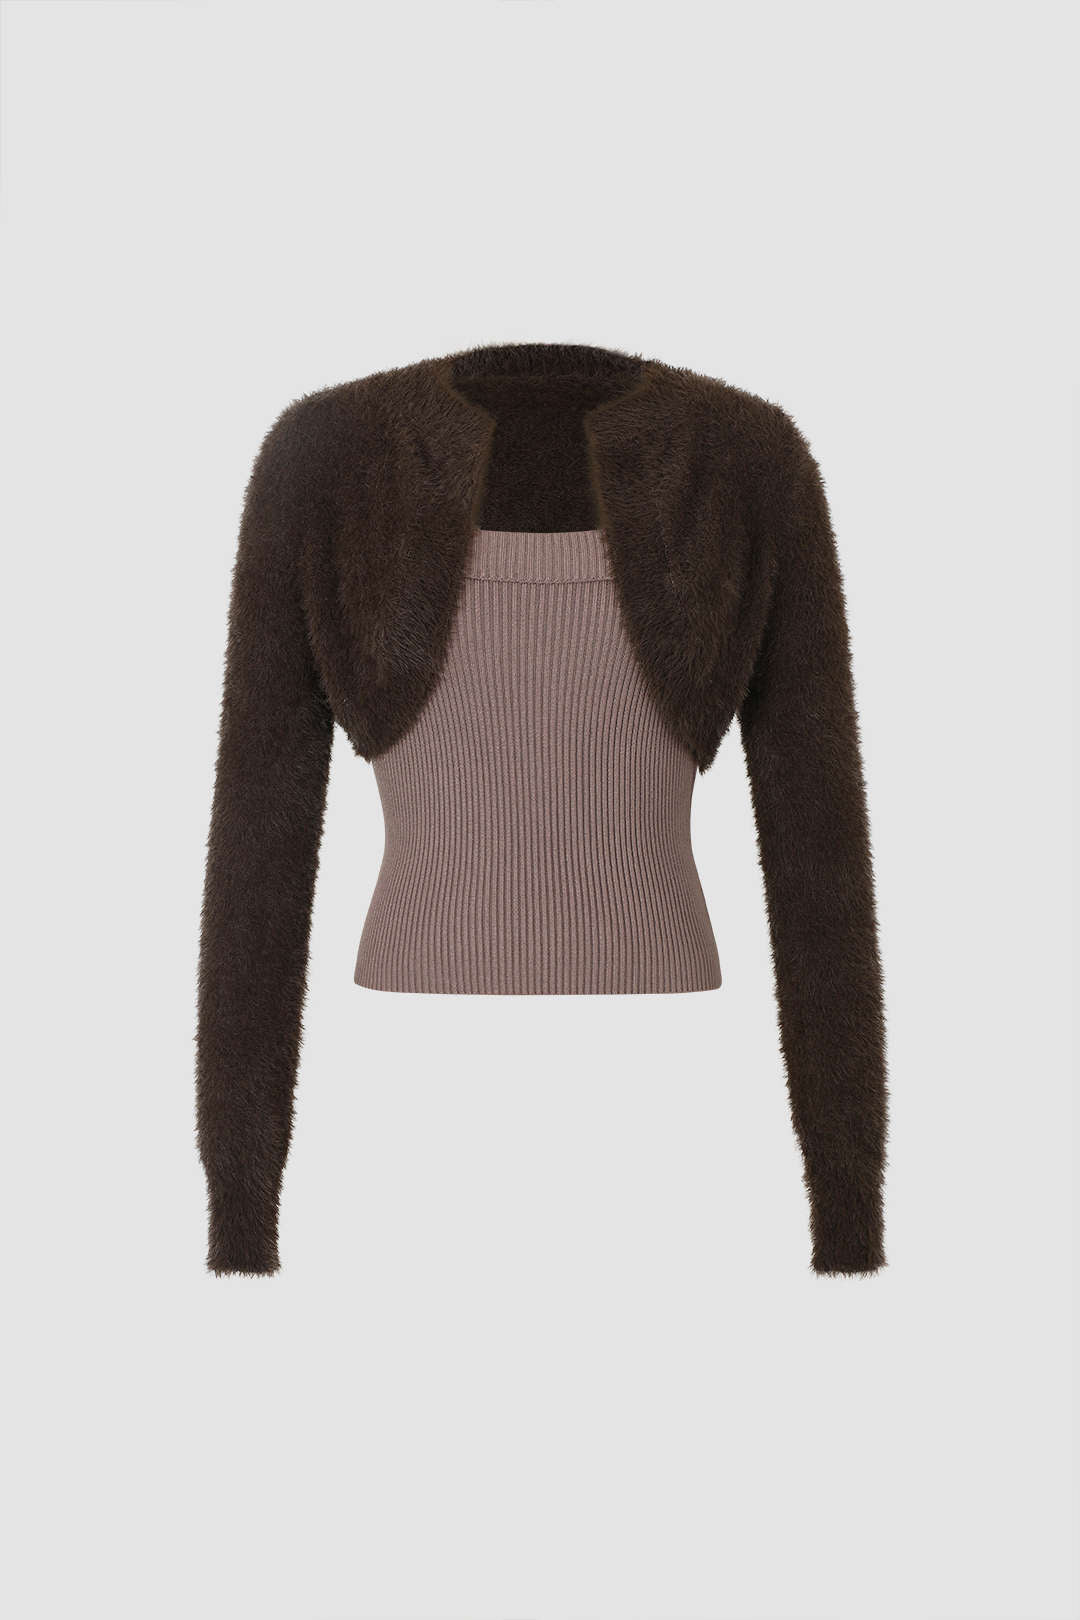 Fuzzy Cropped Shrug And Knit Cami Top Set